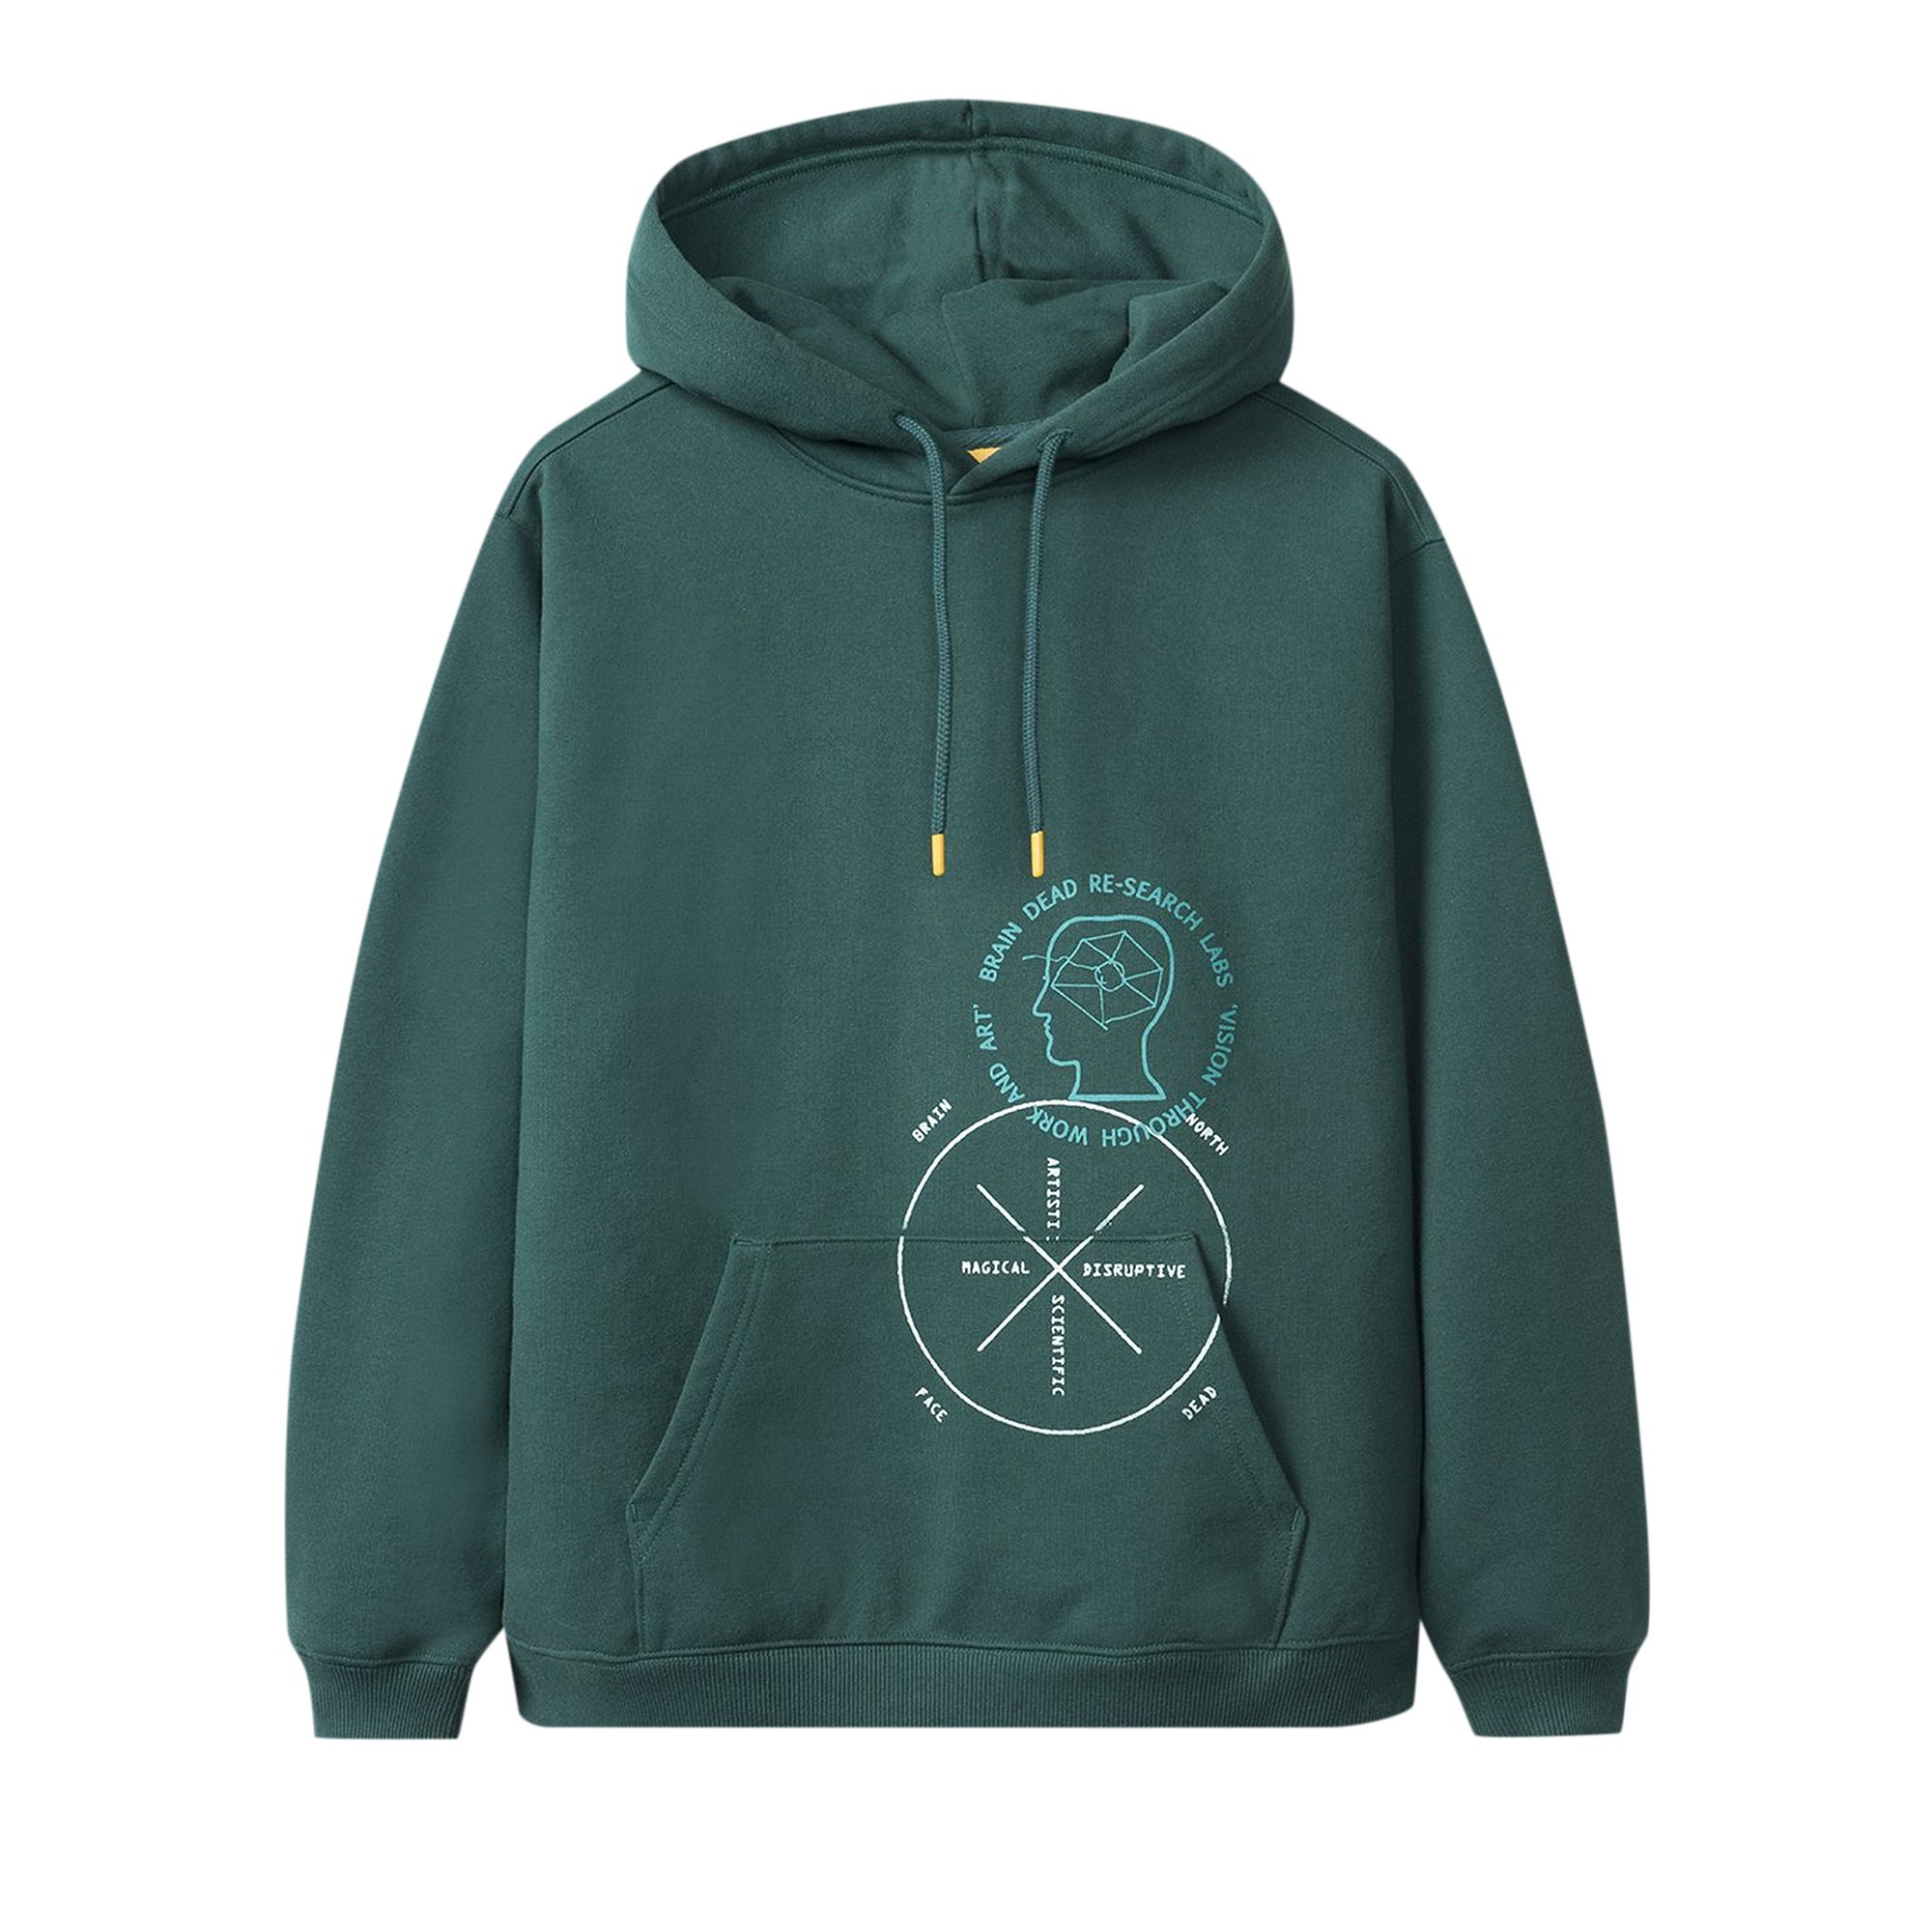 Buy Brain Dead x The North Face Drop Shoulder PO Hoodie 'Night Green' -  BDW19T09001318GR11 | GOAT